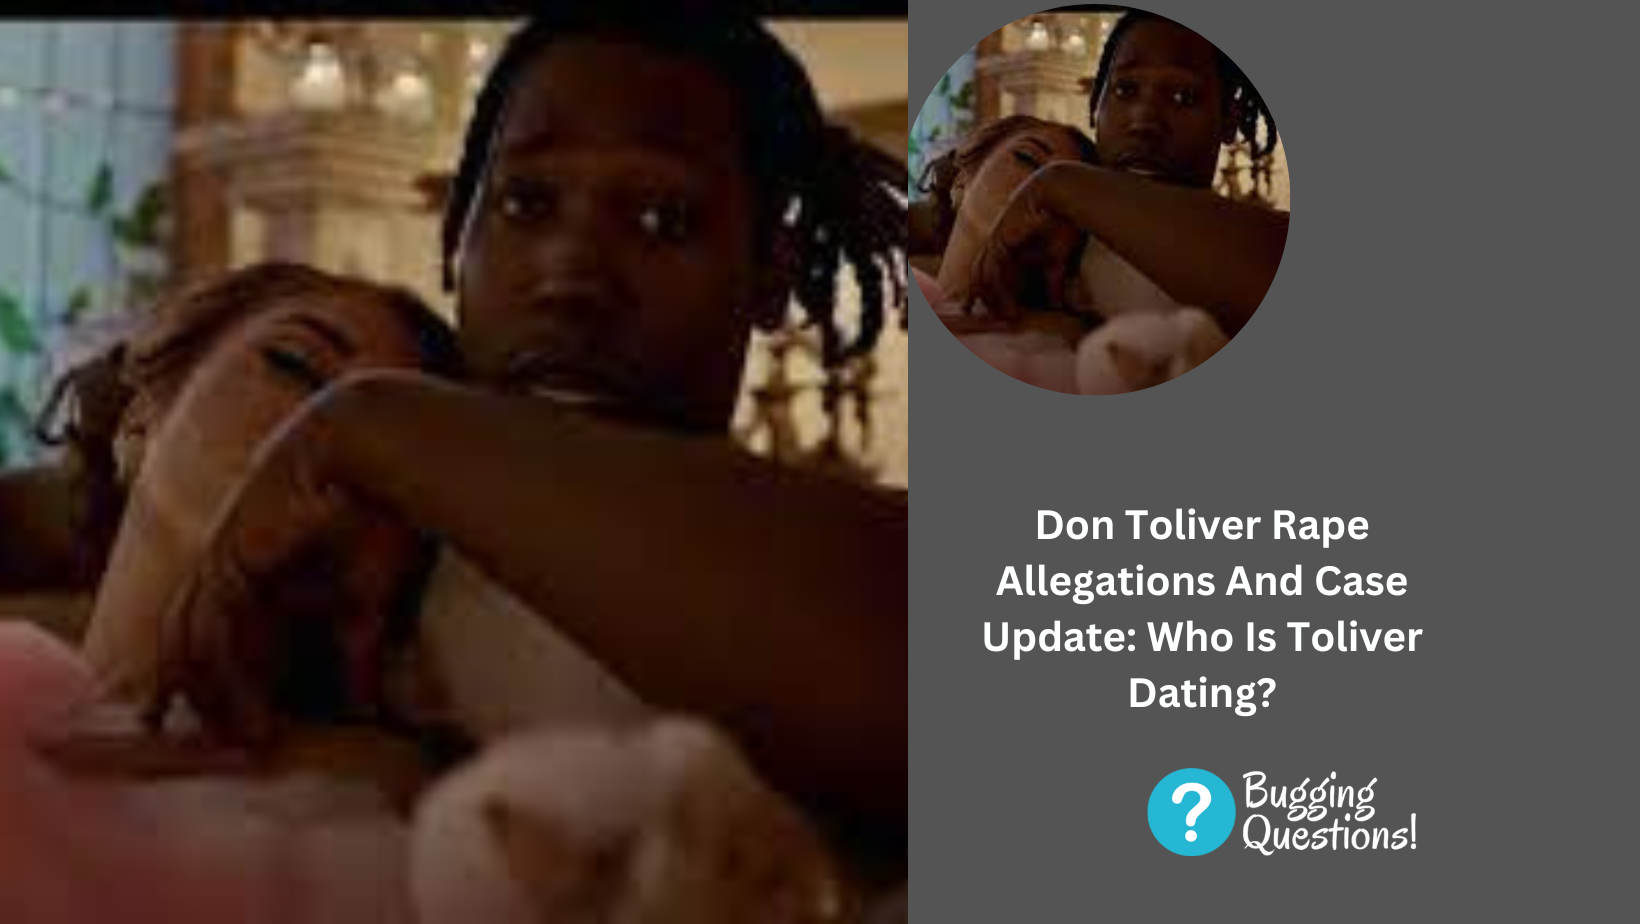 Don Toliver Rape Allegations And Case Update: Who Is Toliver Dating?